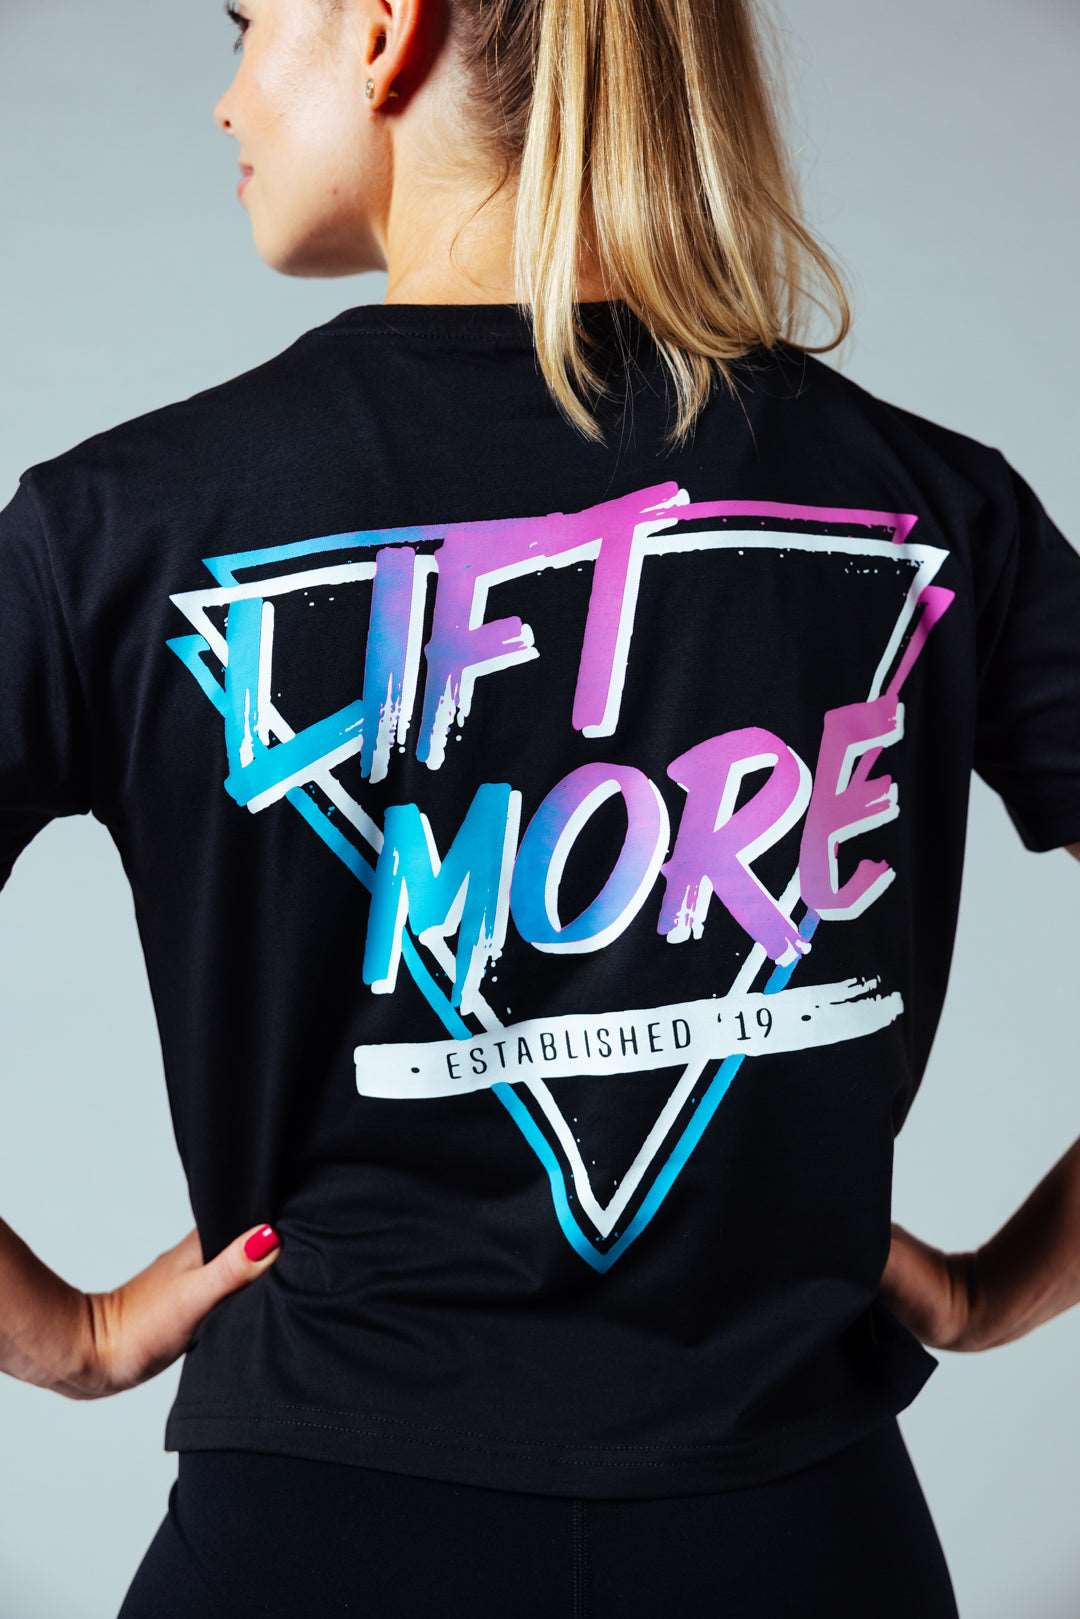 Lift More Crop - Miami Edition - Lifters Wear